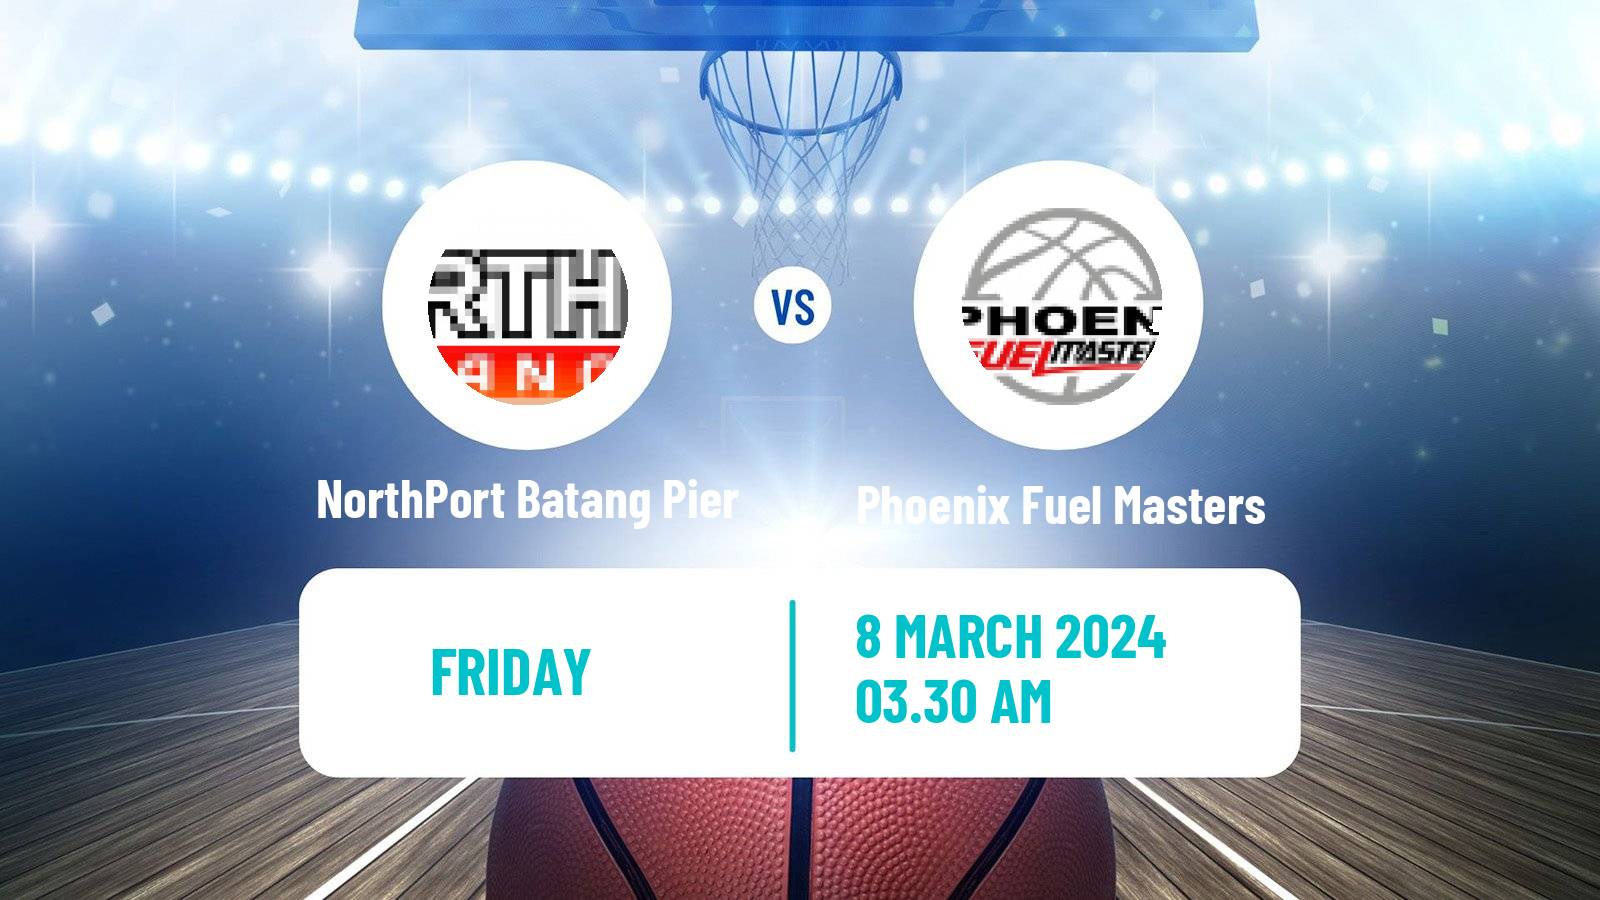 Basketball Philippines Cup NorthPort Batang Pier - Phoenix Fuel Masters